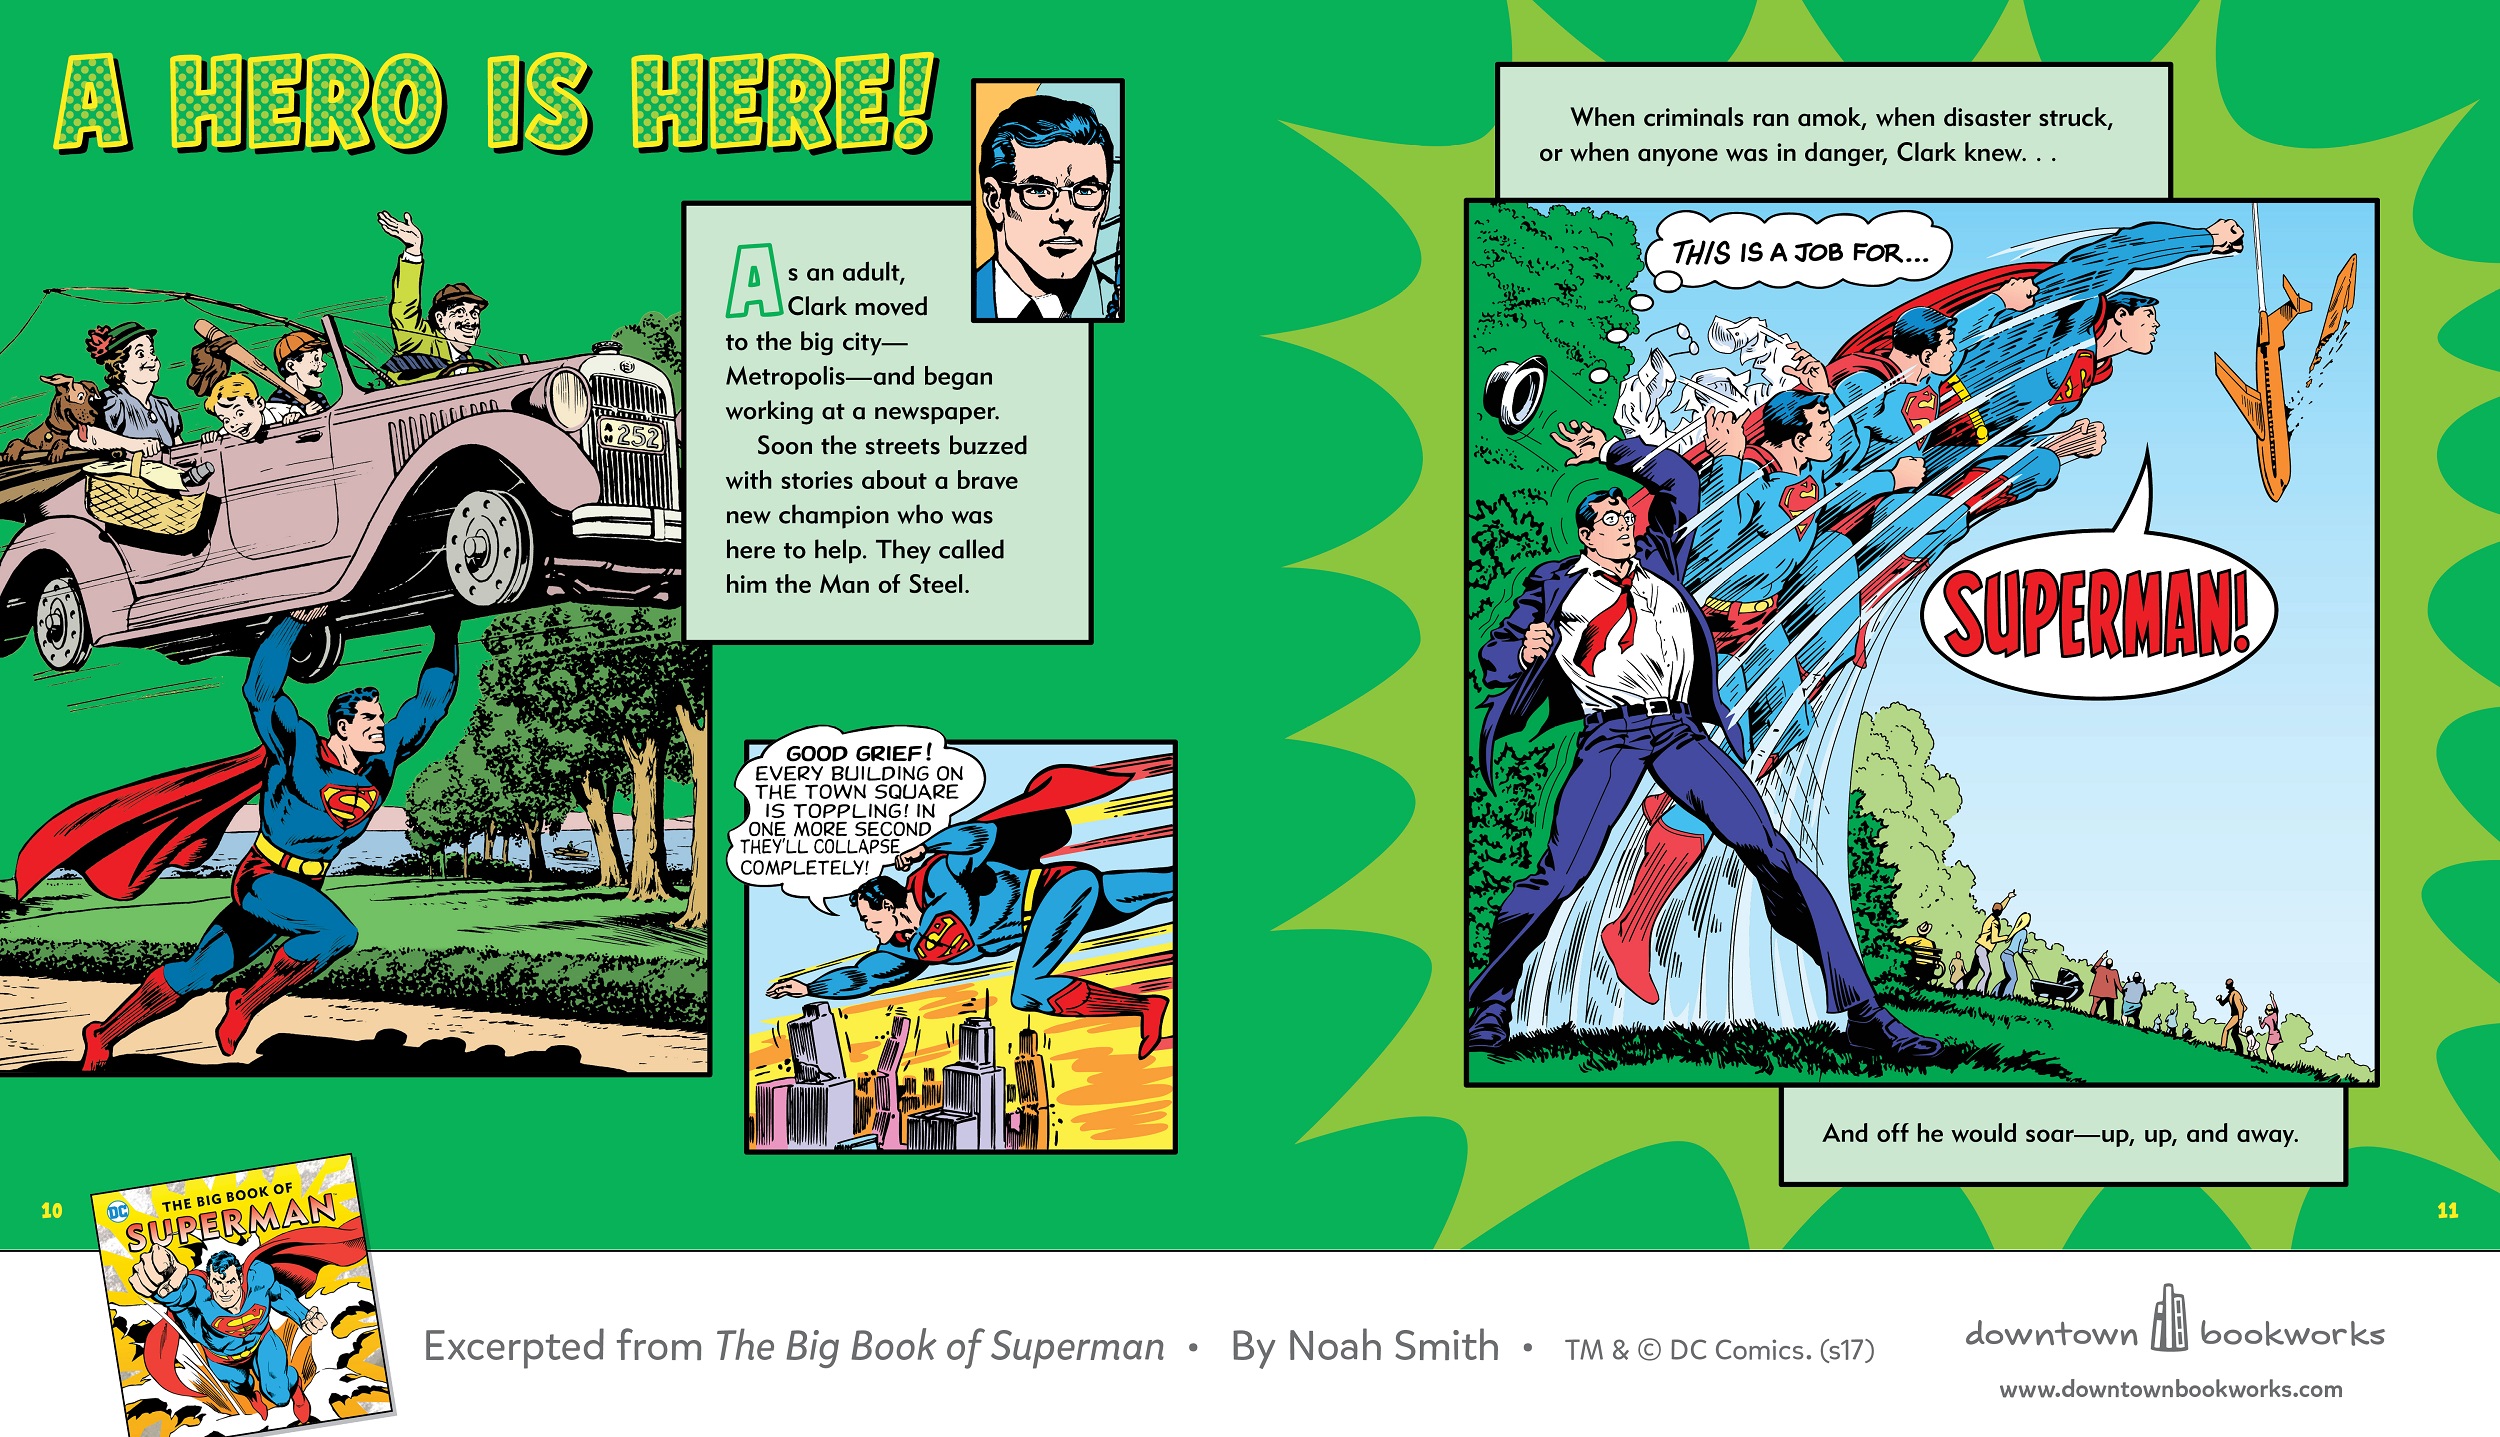 Clark Kent The Big Book of Superman review Downtown Bookworks